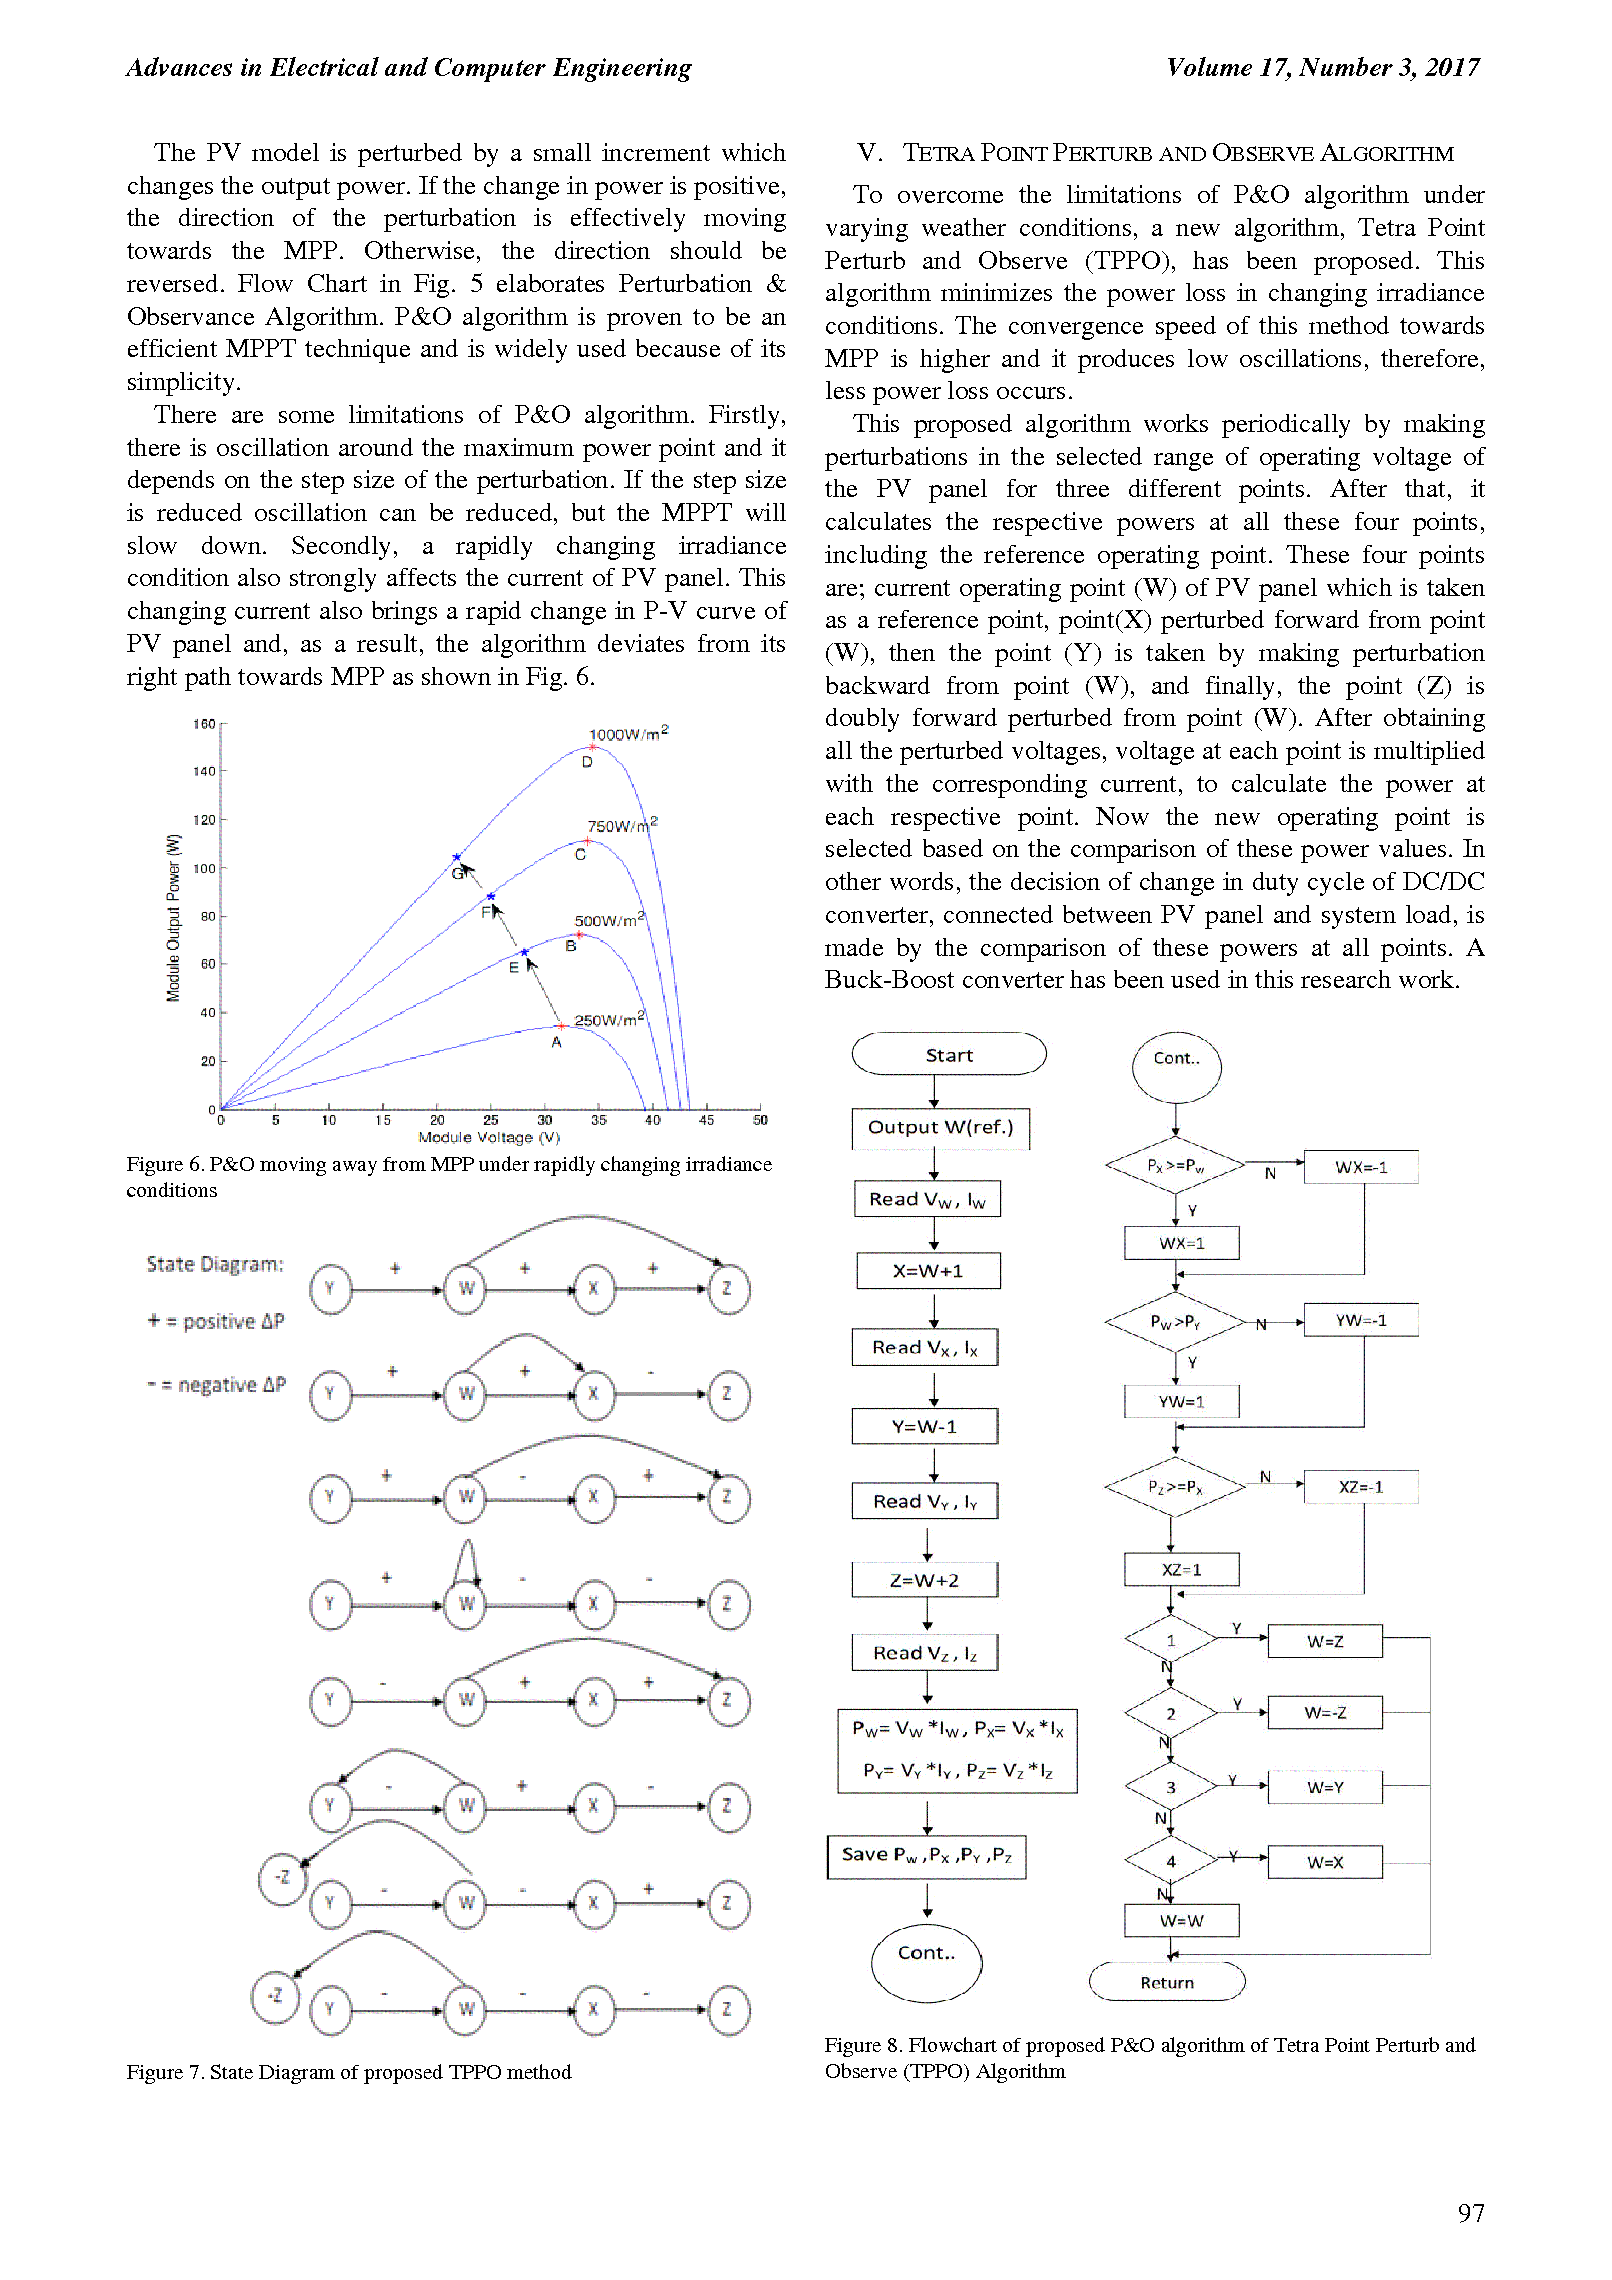 PDF Quickview for paper with DOI:10.4316/AECE.2017.03012